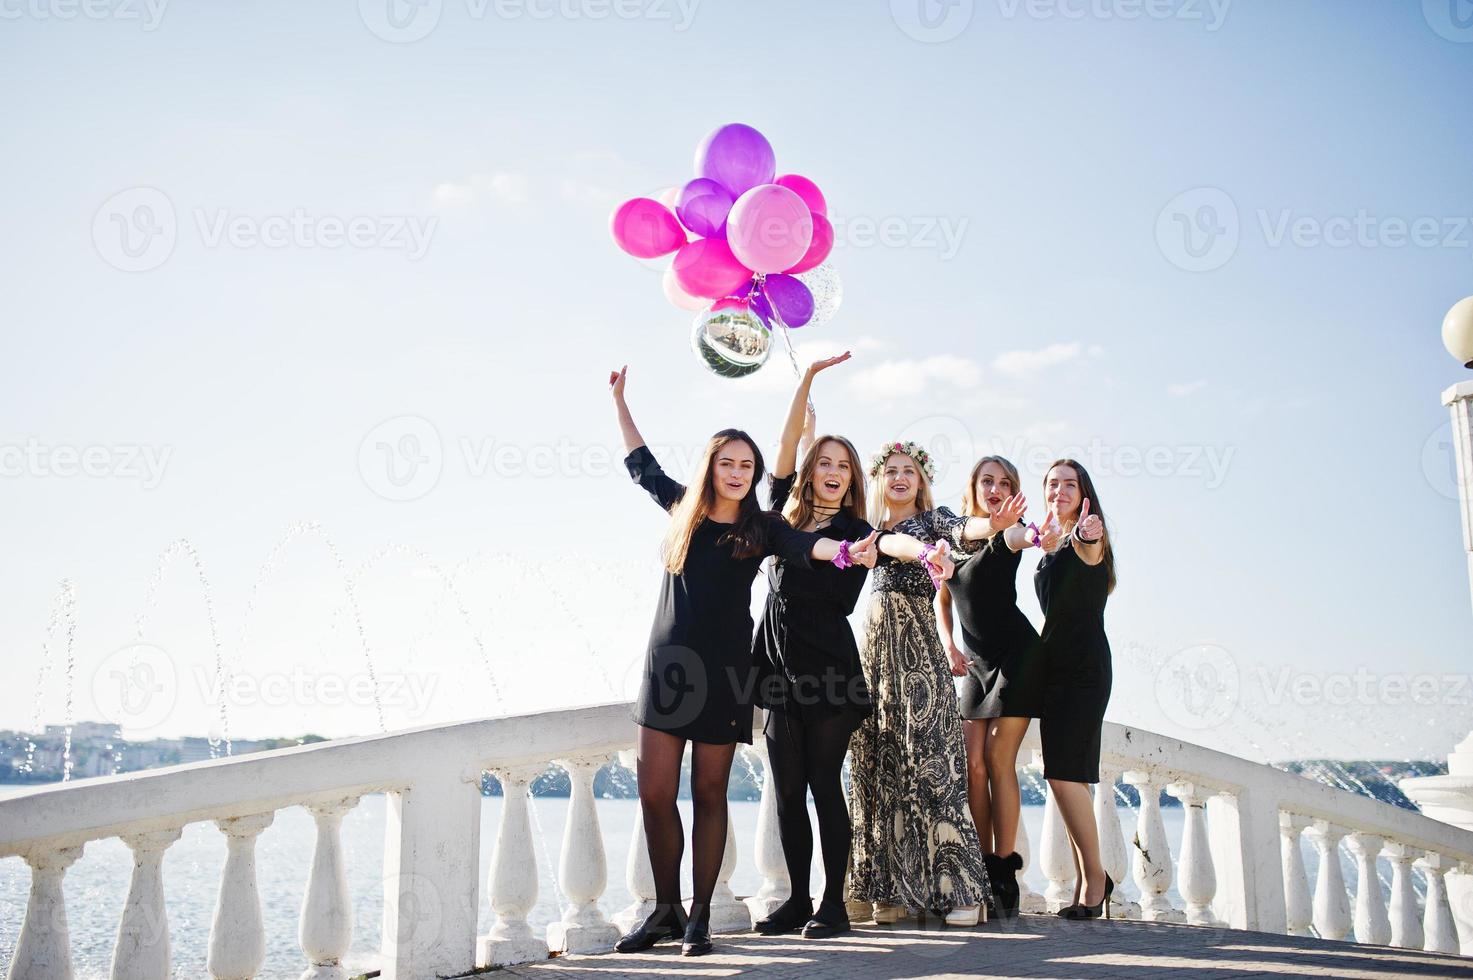 Five girls wear on black walking with balloons at hen party against lake. photo